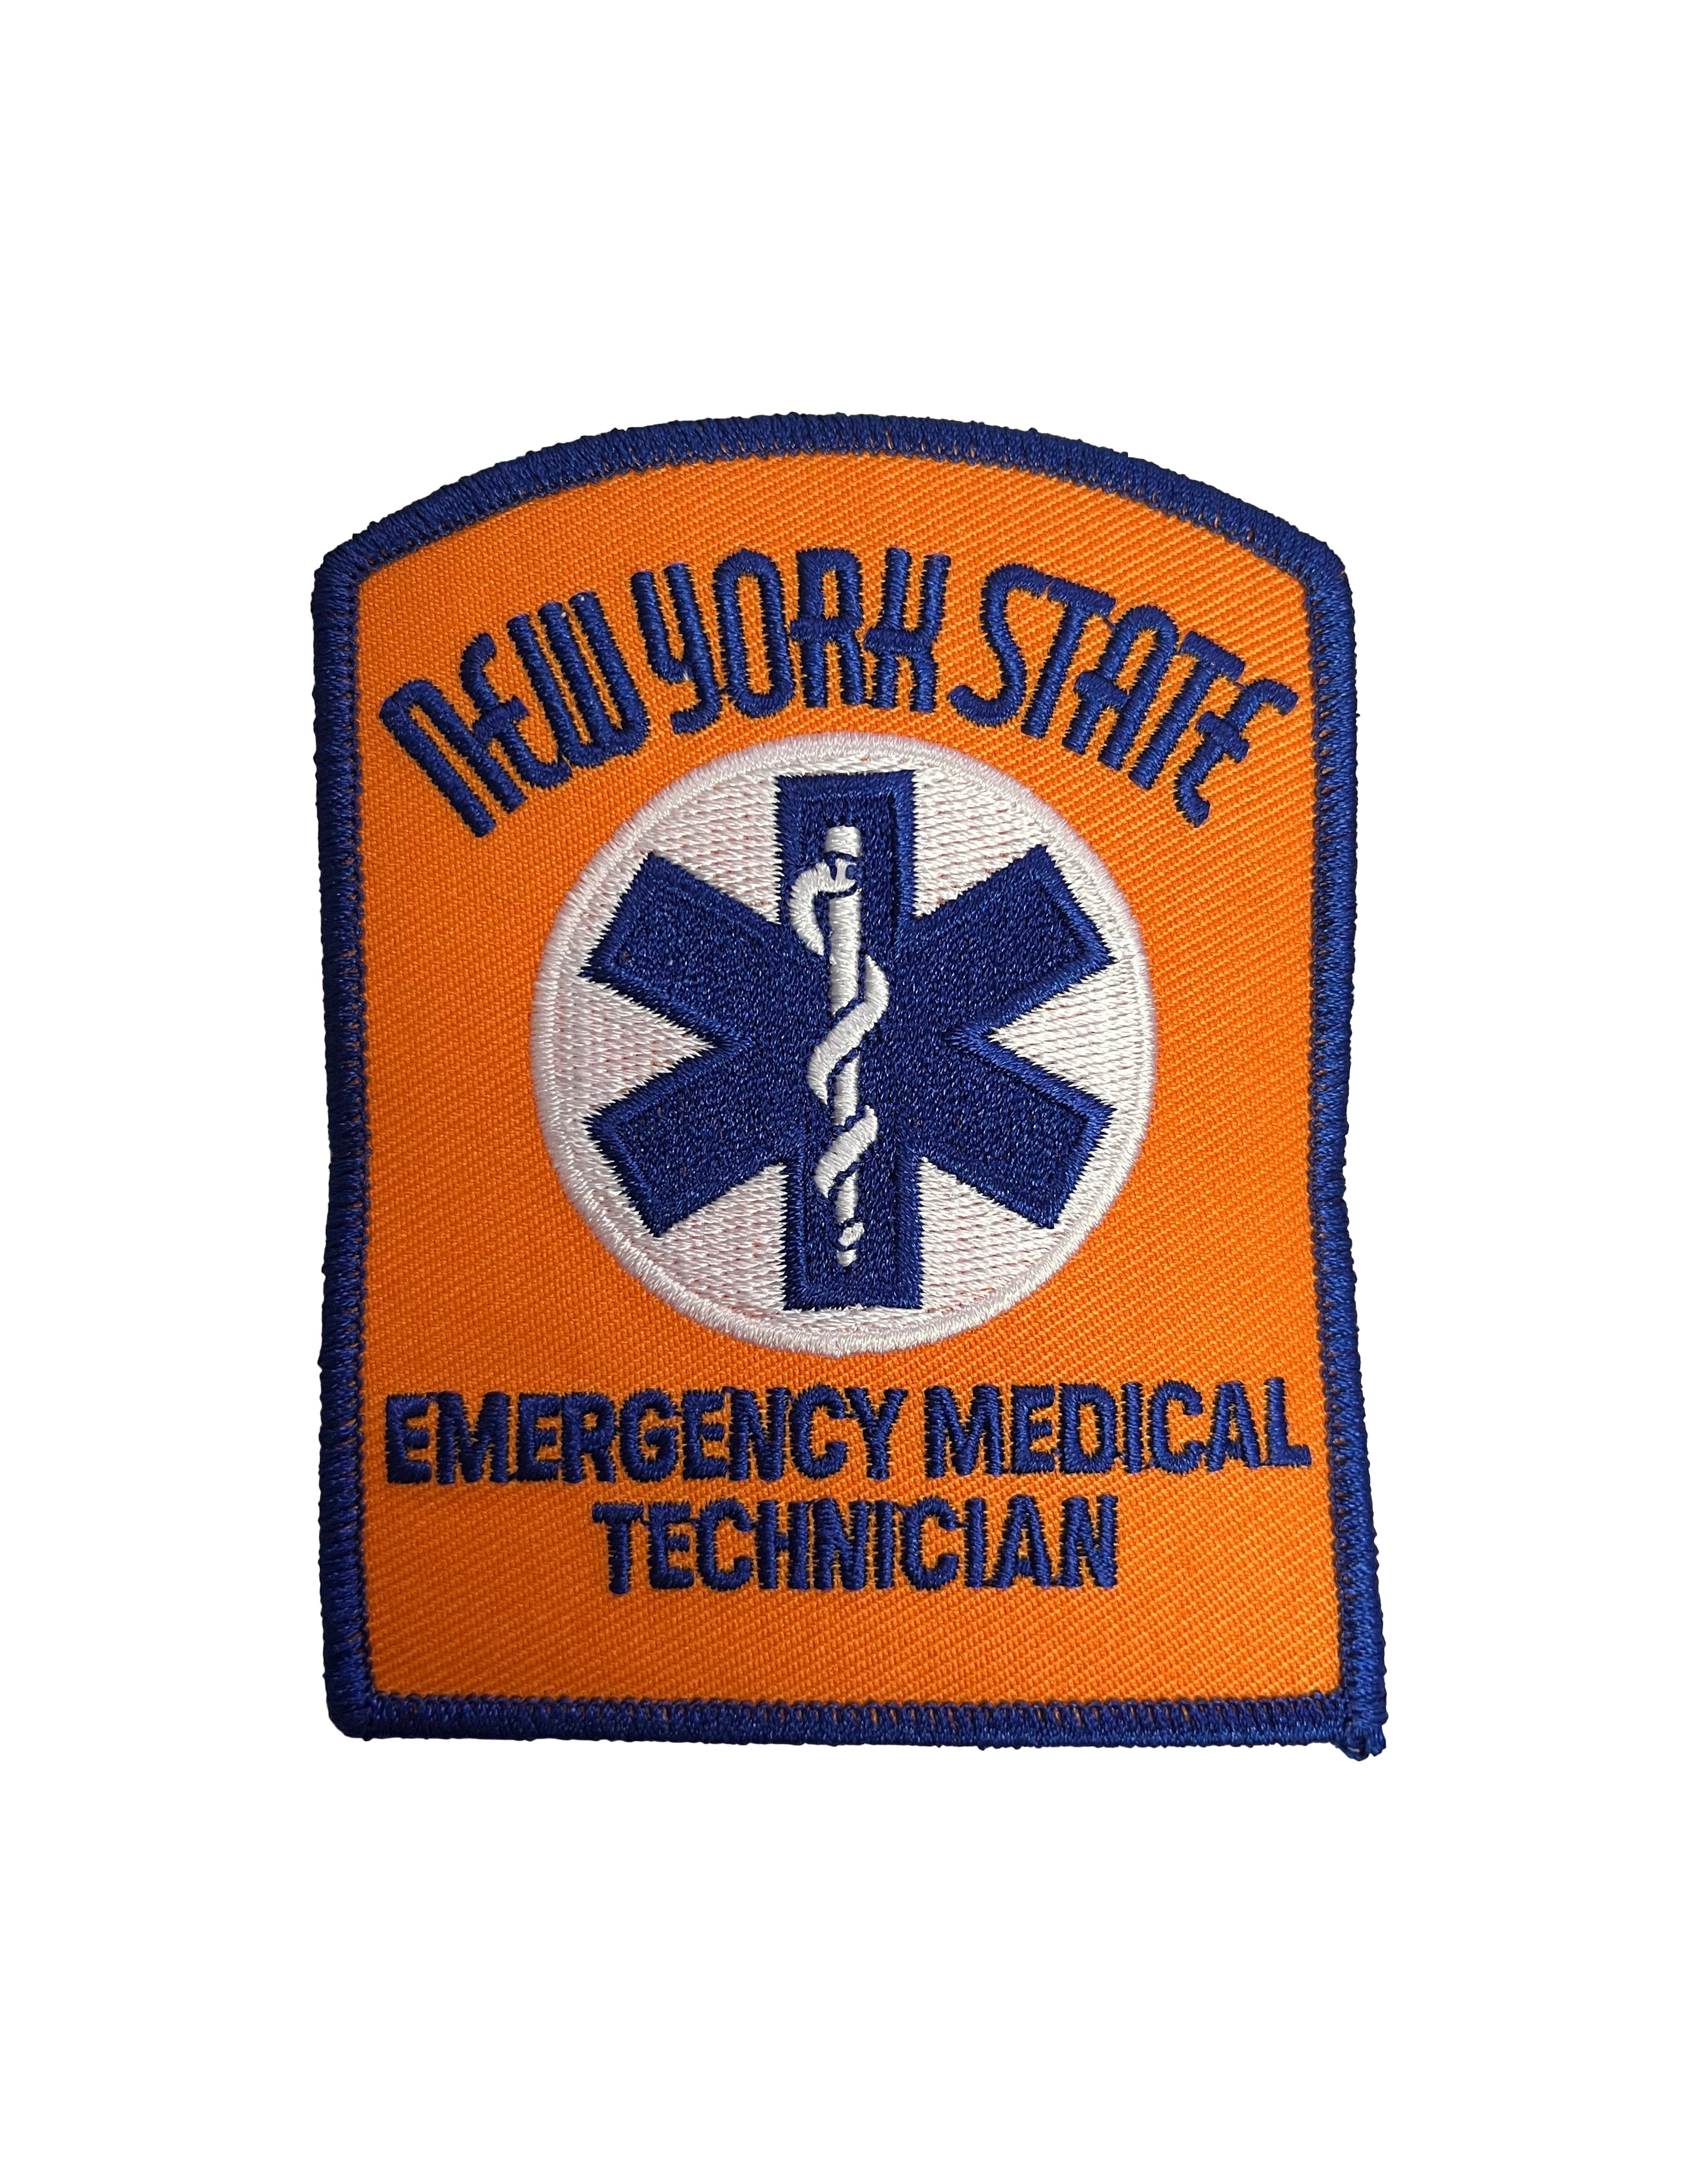 New York EMT Patch Sticker for Sale by SeanC898